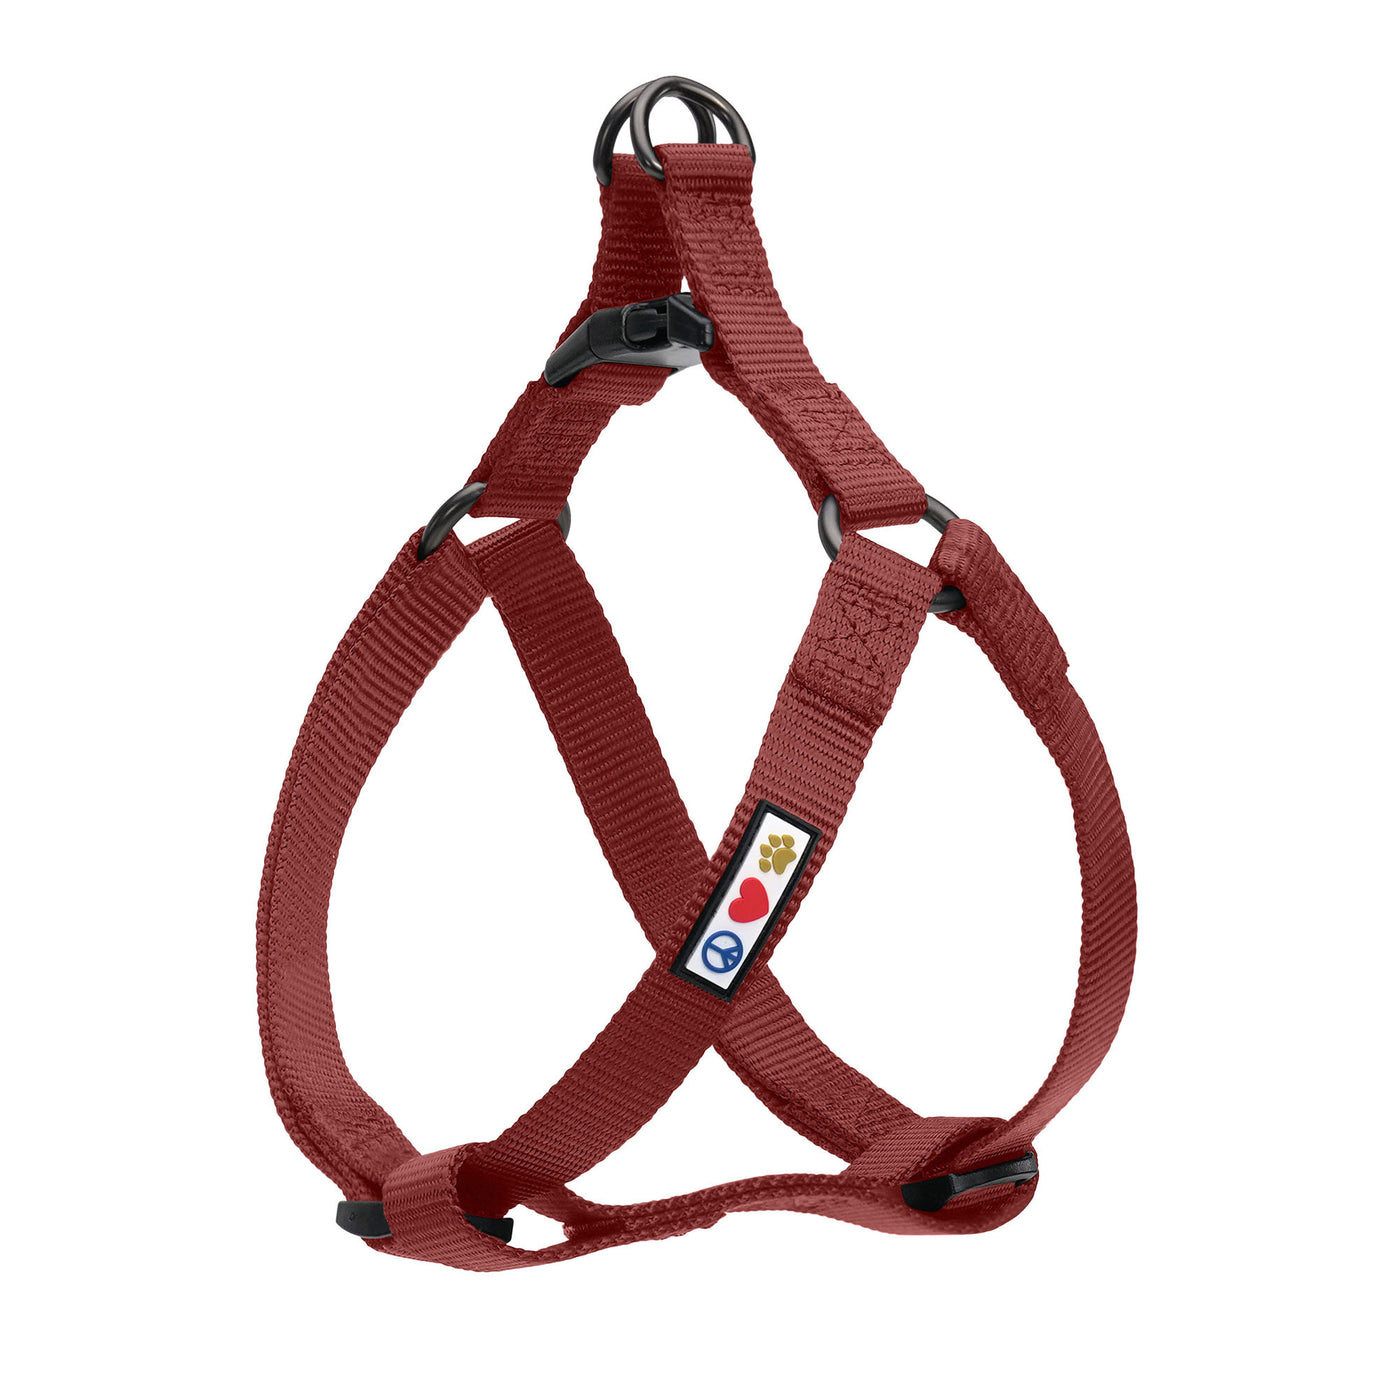 Marsala Solid Step-in Dog Harness